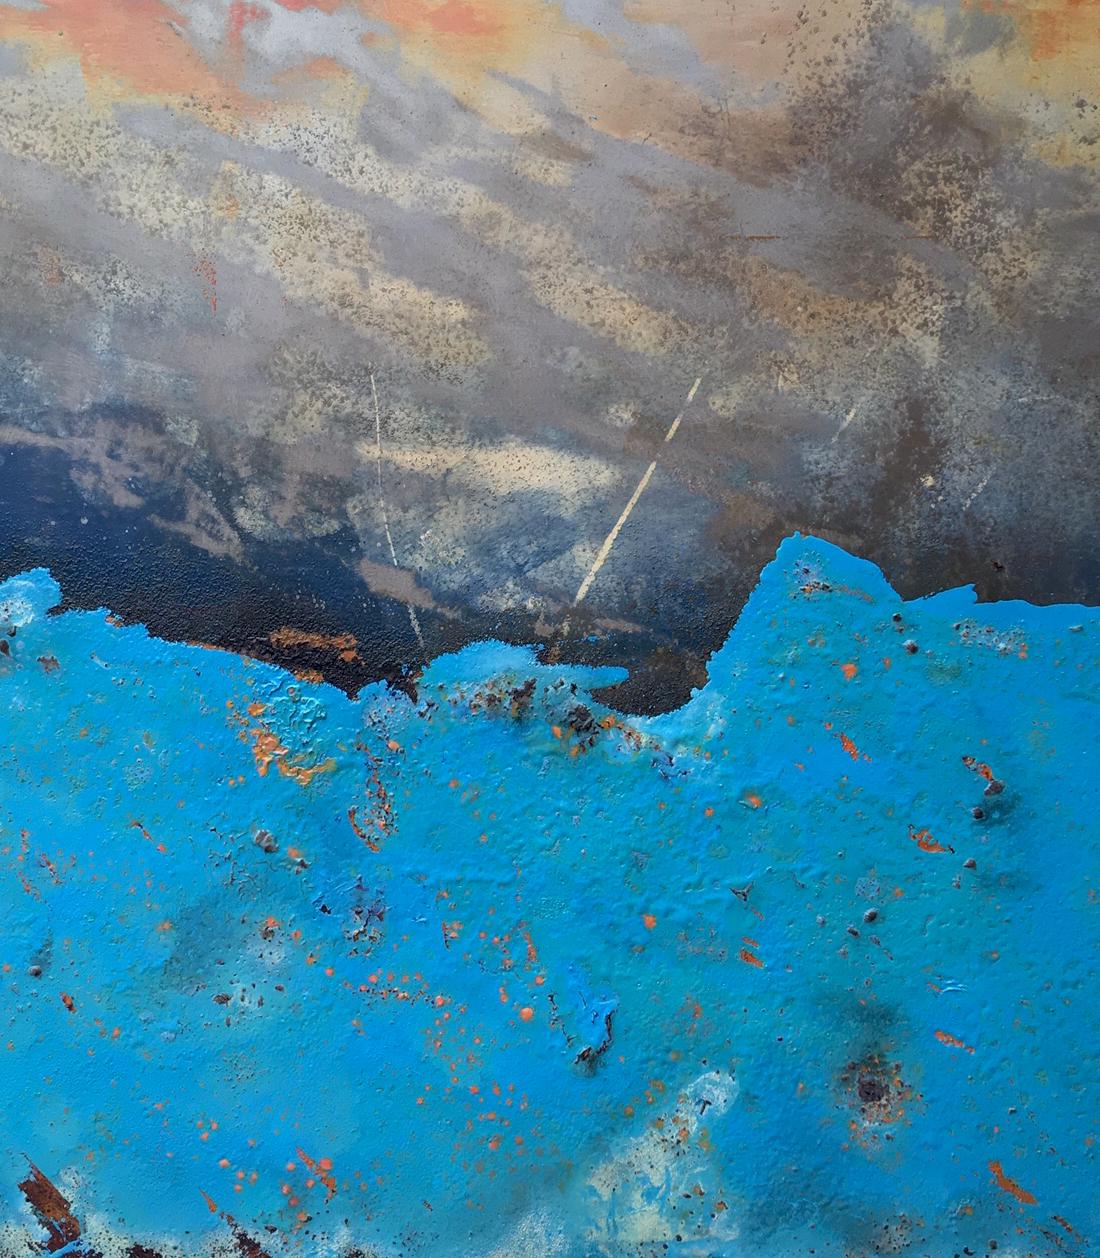 Morlais by Sam Peacock - Contemporary abstract, Blue Landscape on steel  2